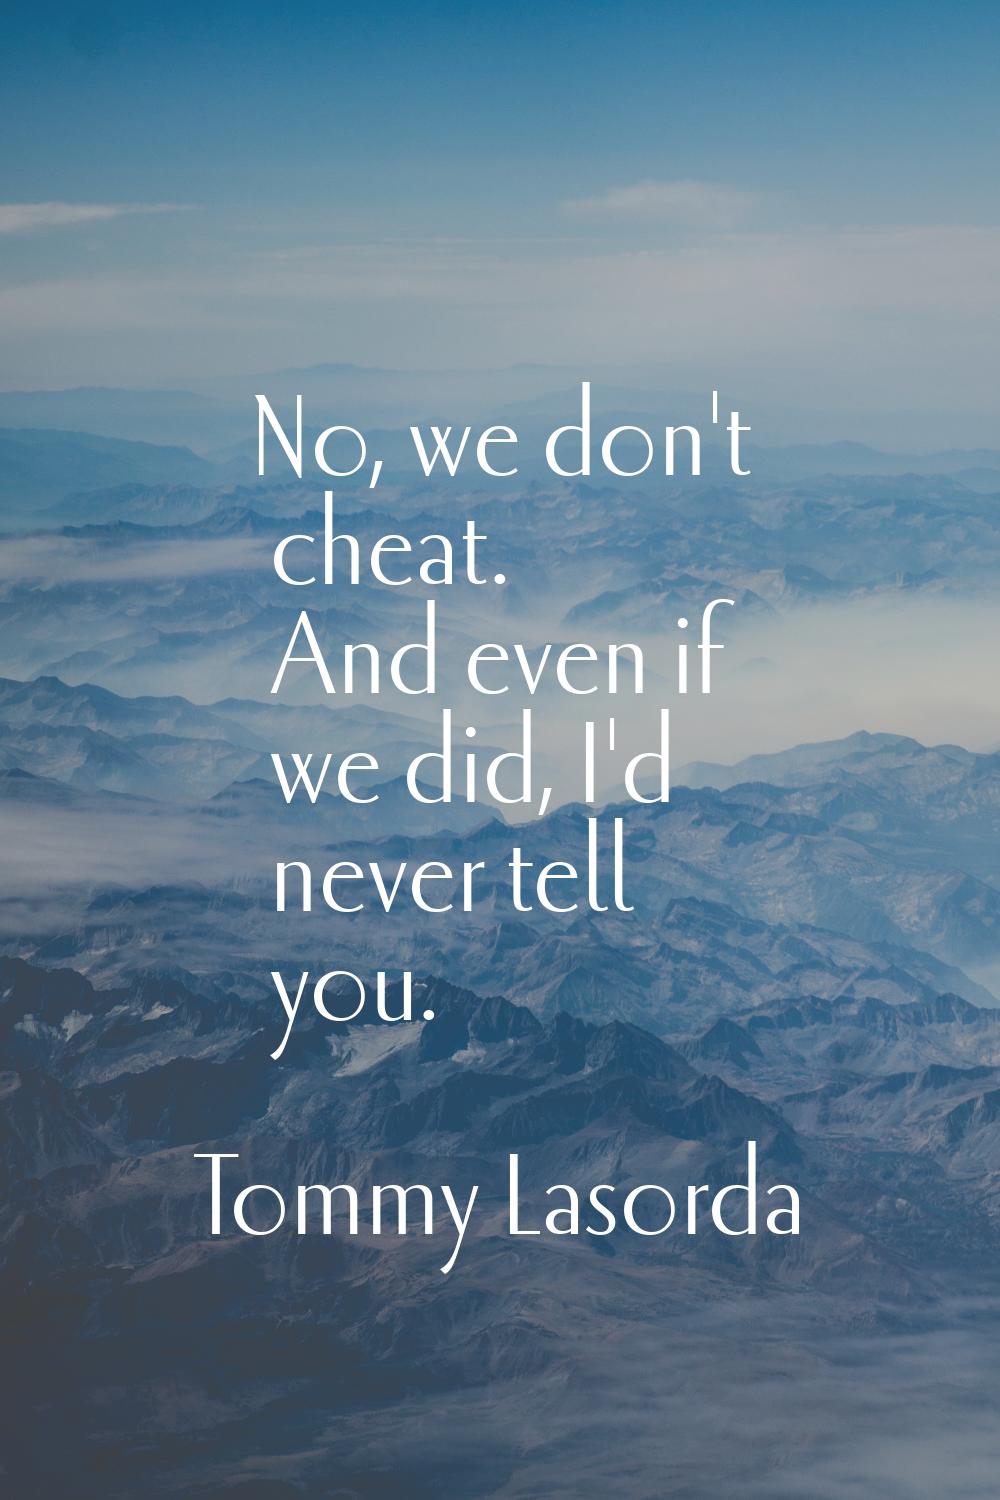 No, we don't cheat. And even if we did, I'd never tell you.